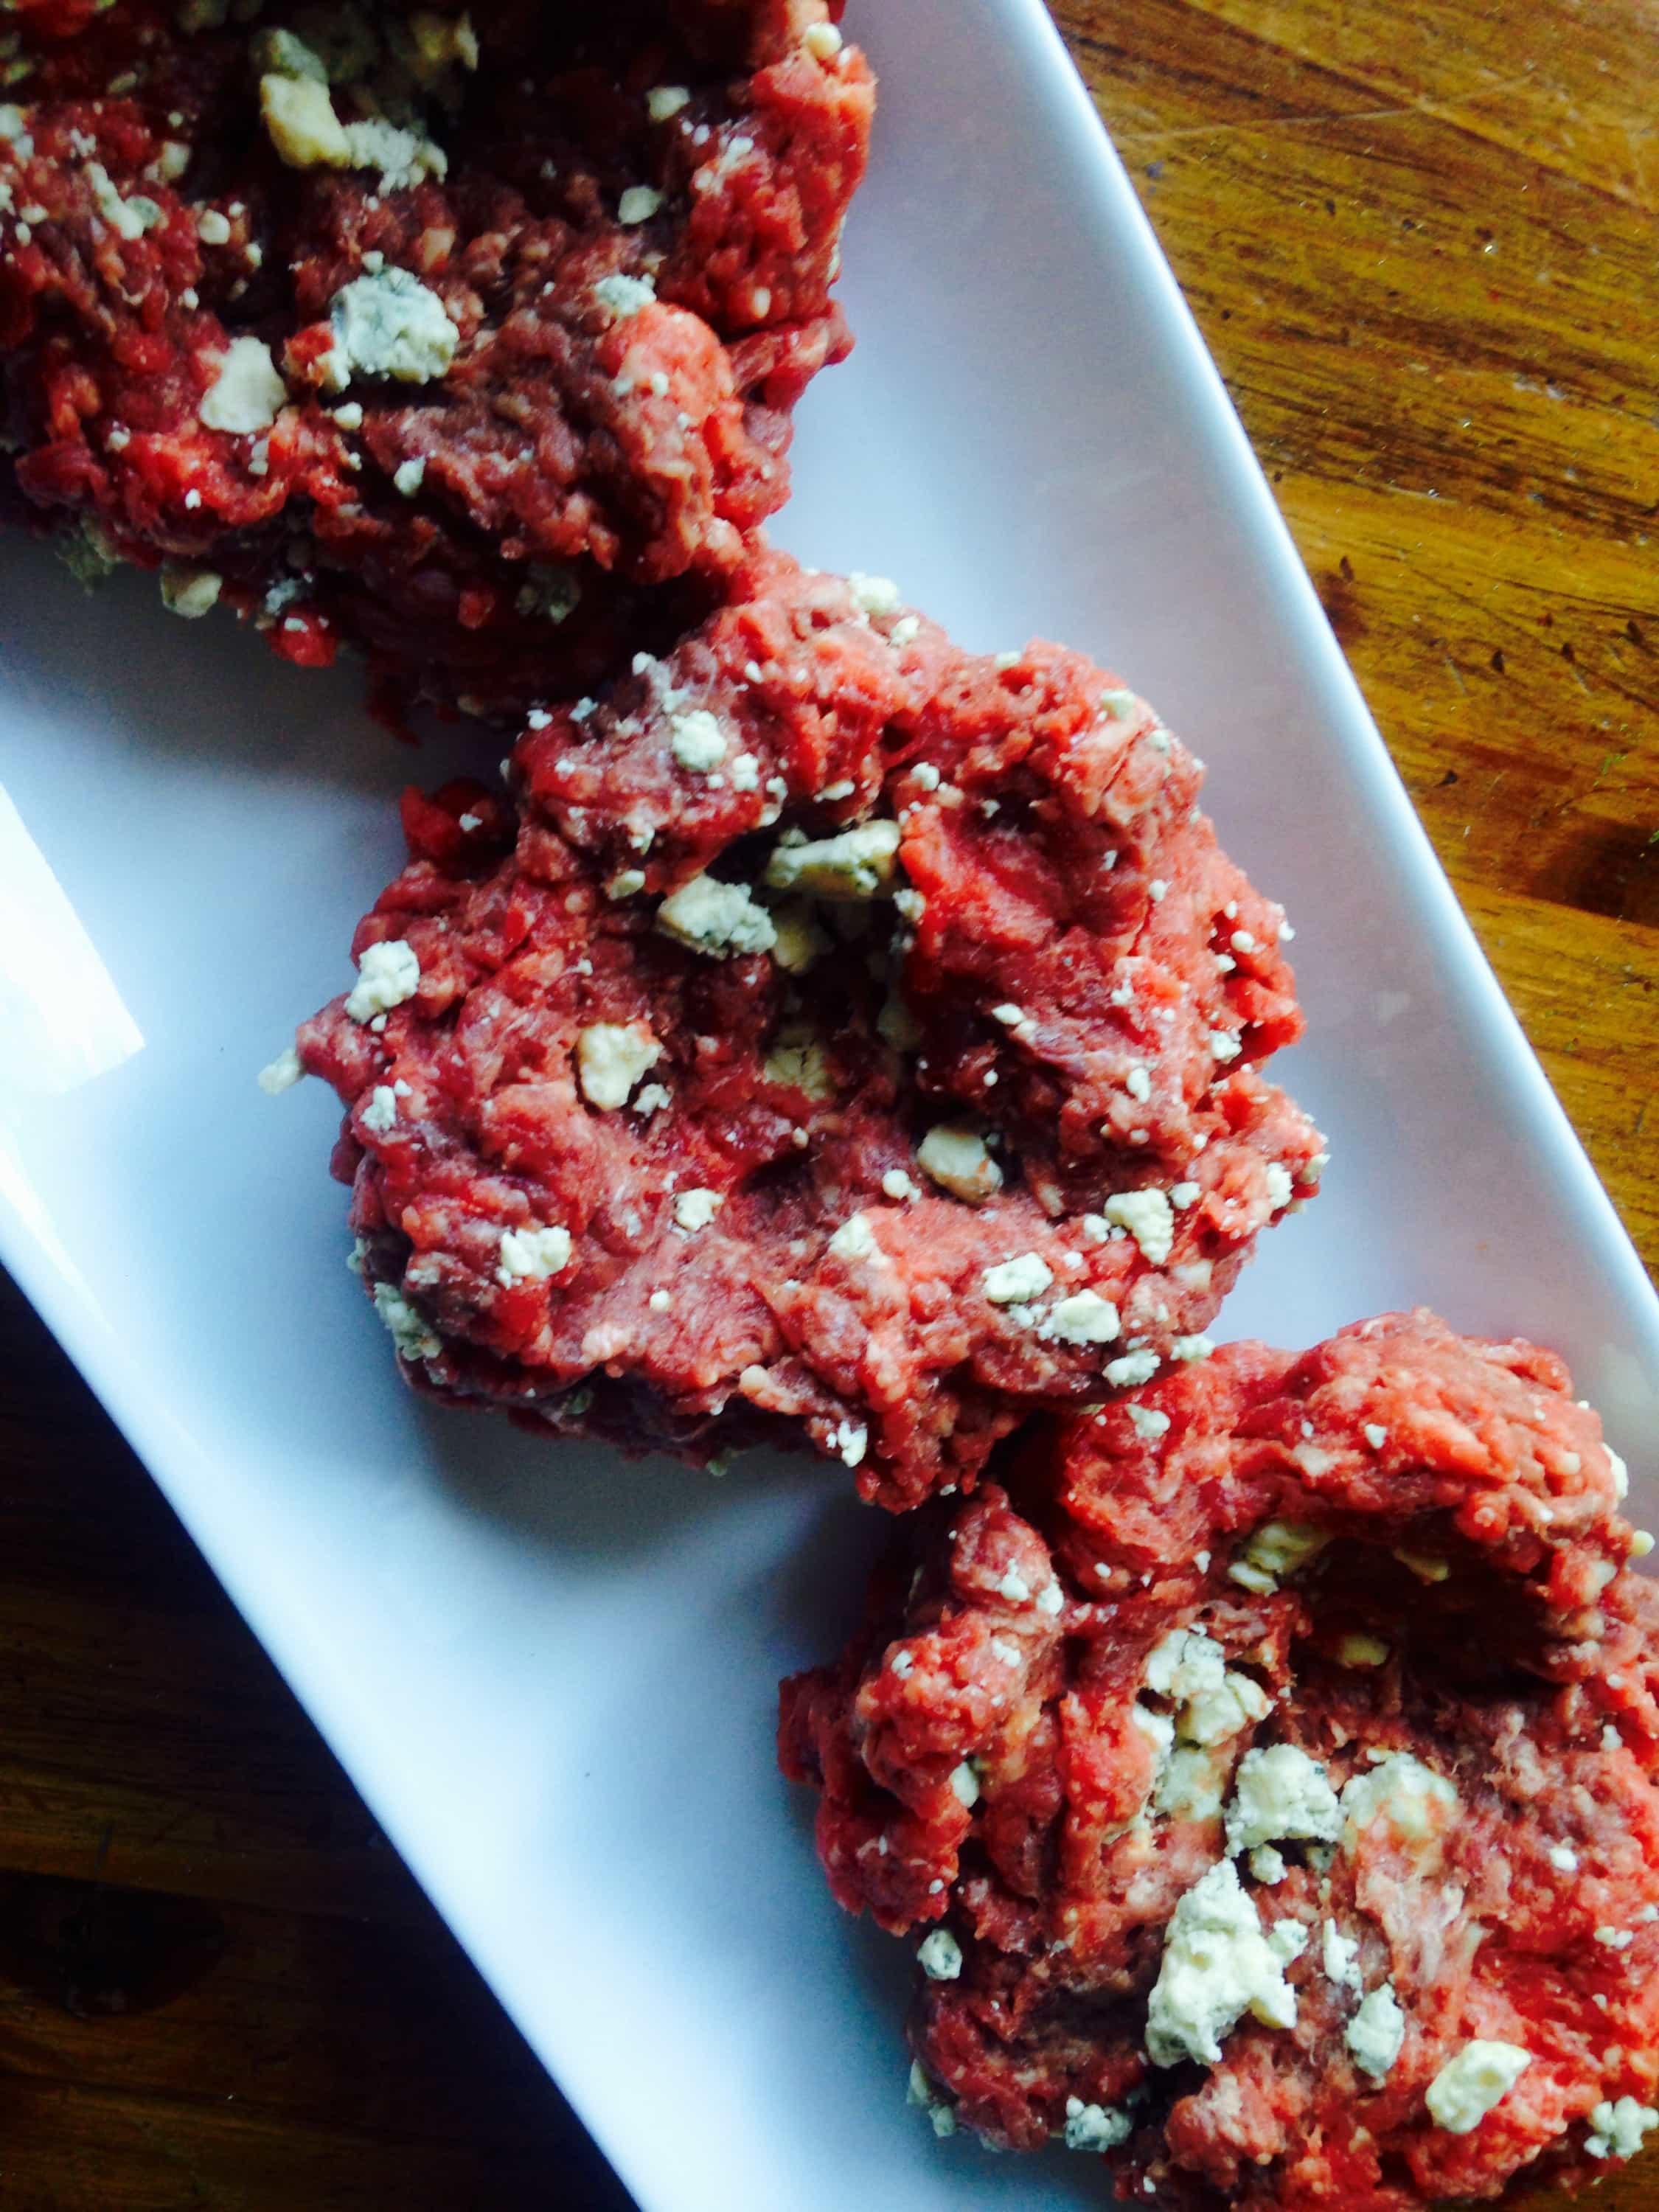 raw sirloin patties with blue cheese crumbles on a long rectangular plate